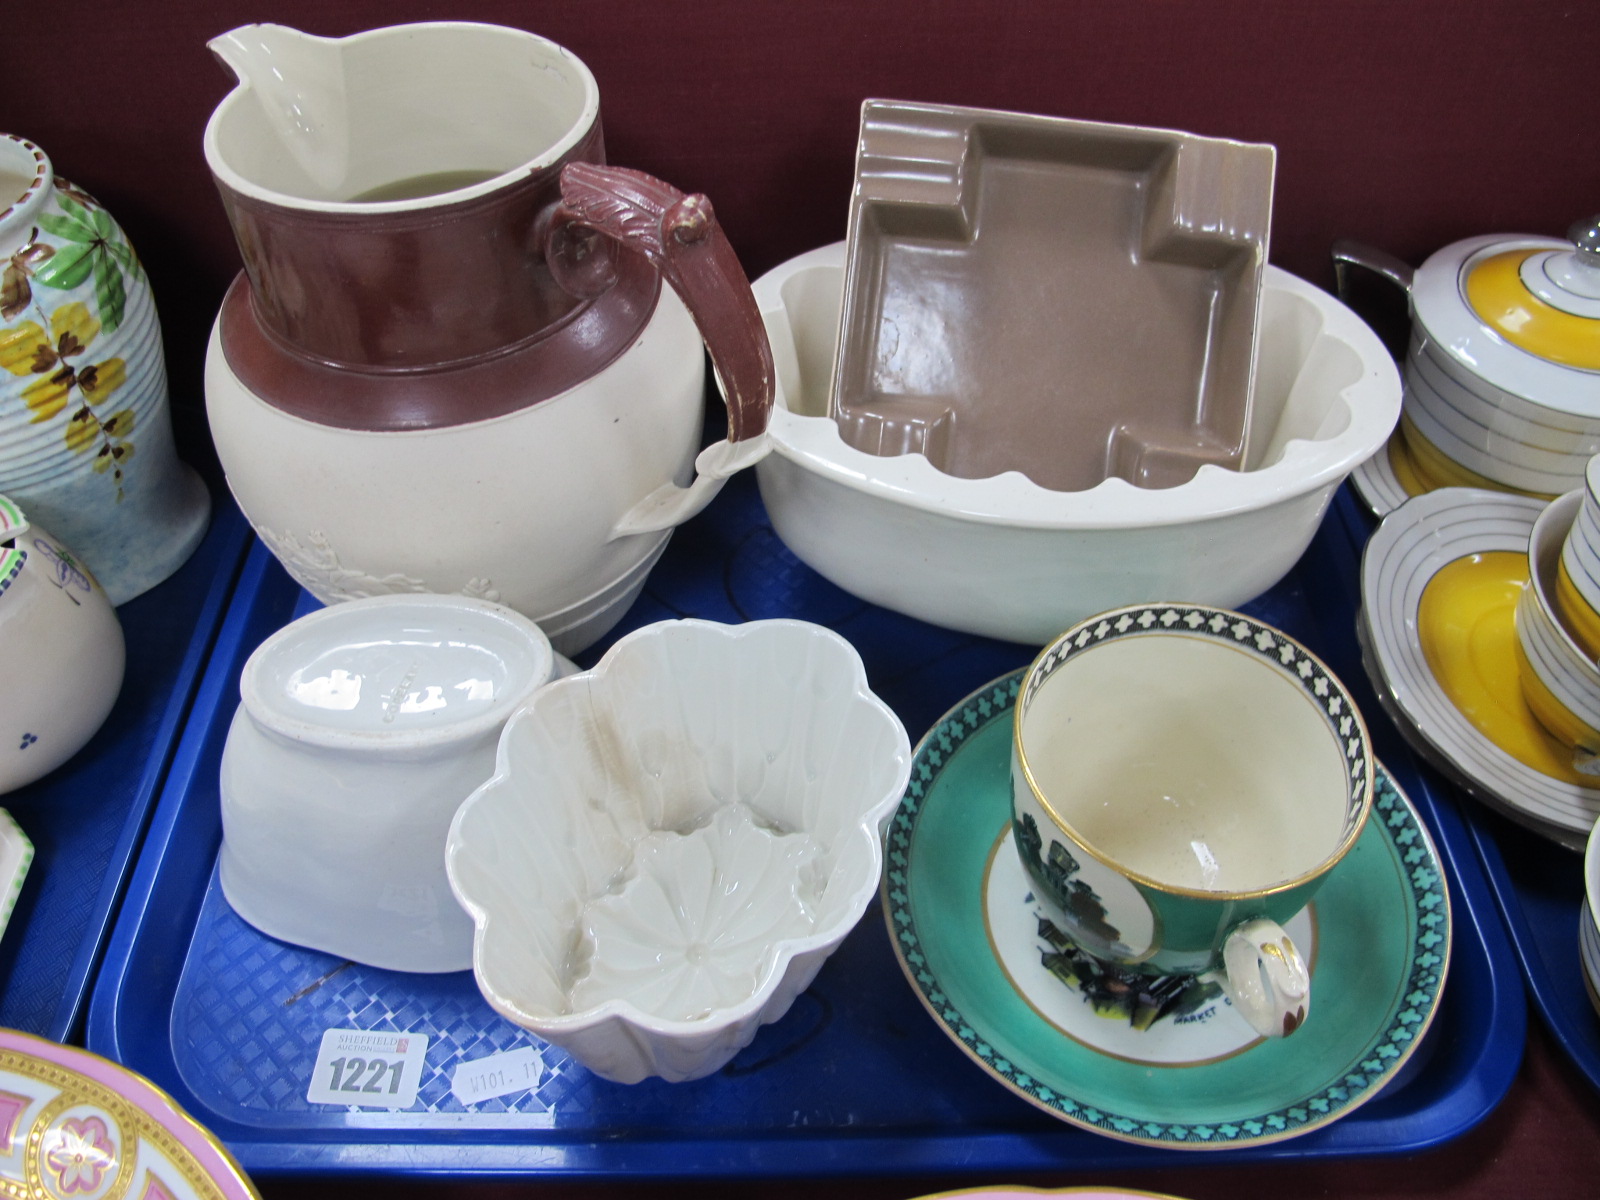 Three Jelly Moulds, a XIX Century jug, Poole ashtray, Welsh costume cup and saucer:- One Tray.